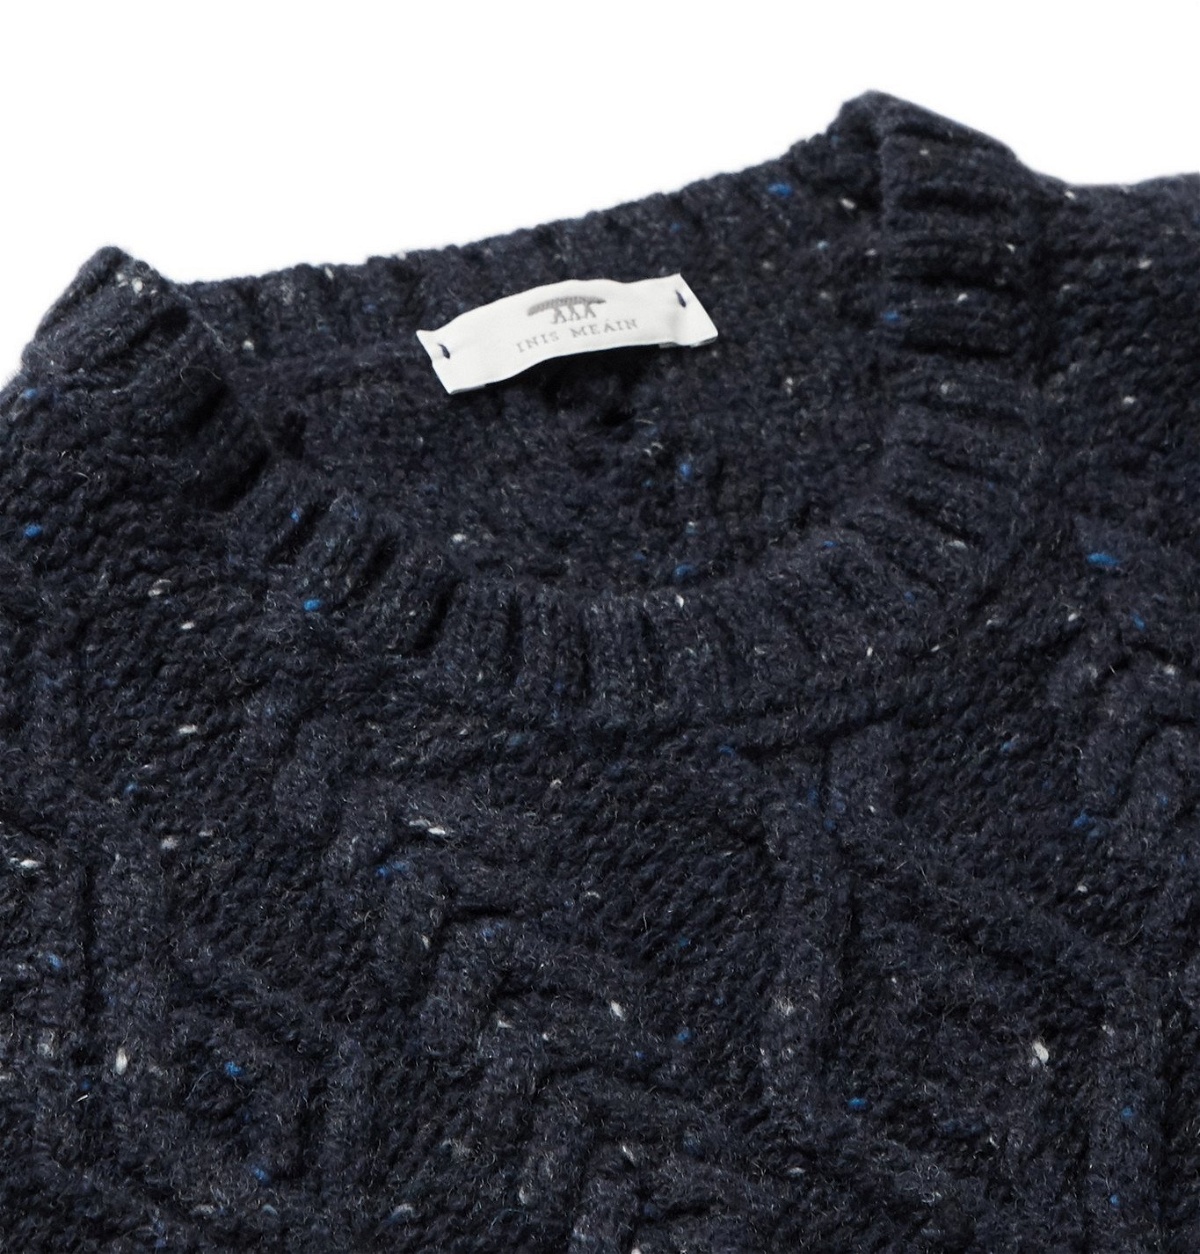 Inis Meáin - Flecked Cable-Knit Merino Wool and Cashmere-Blend